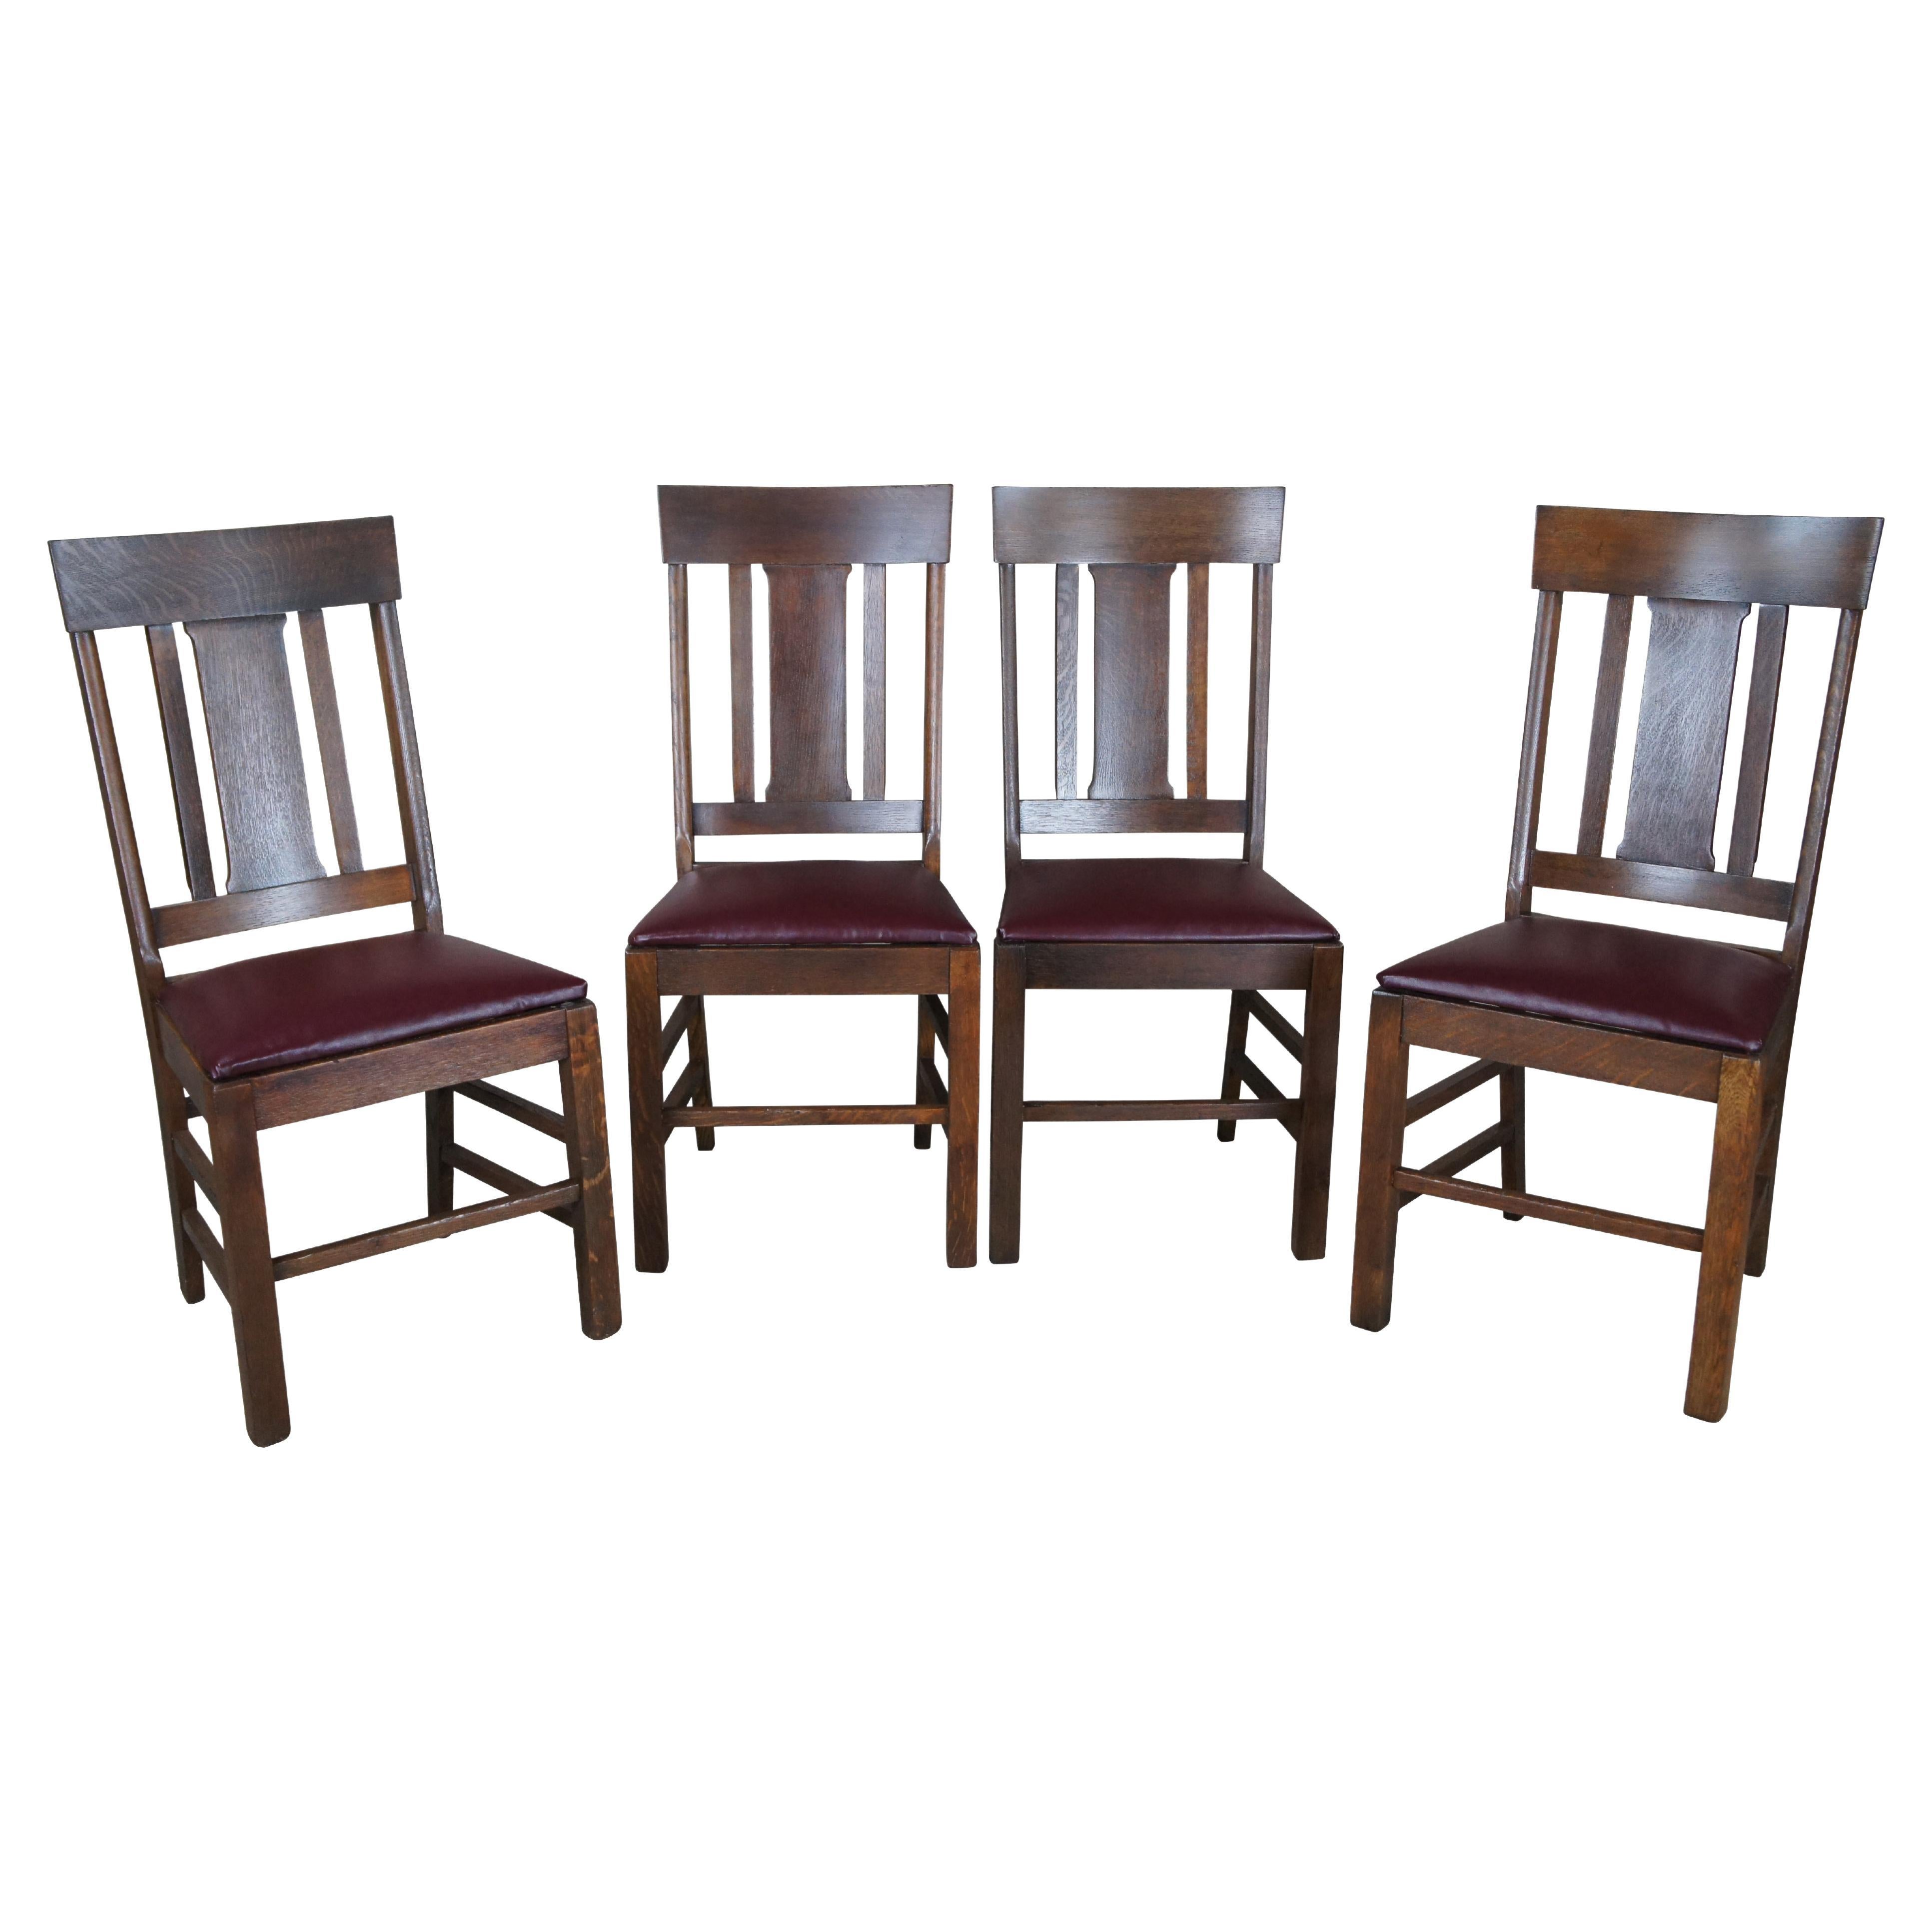 4 Antique Quartersawn Oak Mission Arts & Crafts Style Slat Back Dining Chairs For Sale